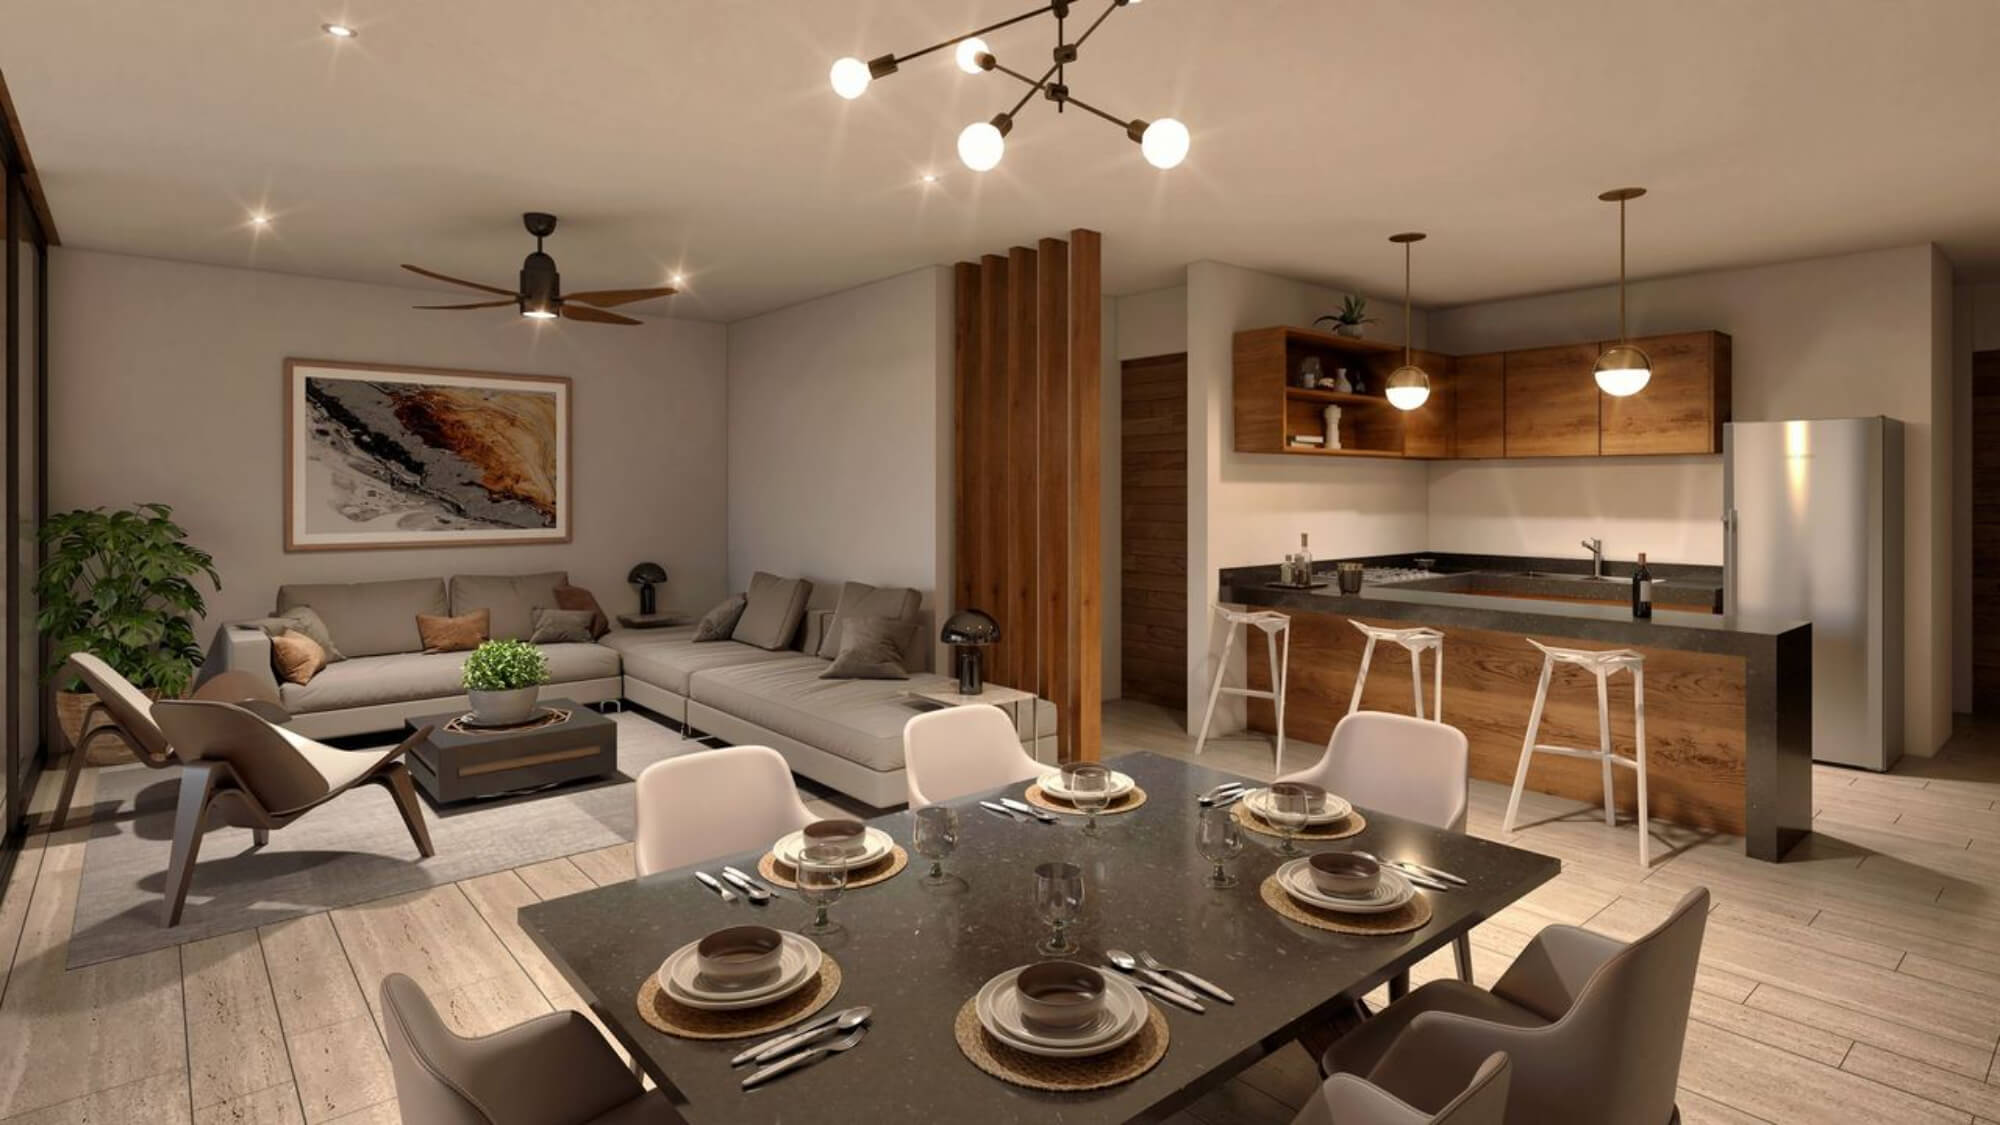 Large condo with garden, 258 m2, concierge &amp; driver, clubhousewith exclusive amenities, pre-construction for sale in Merida.